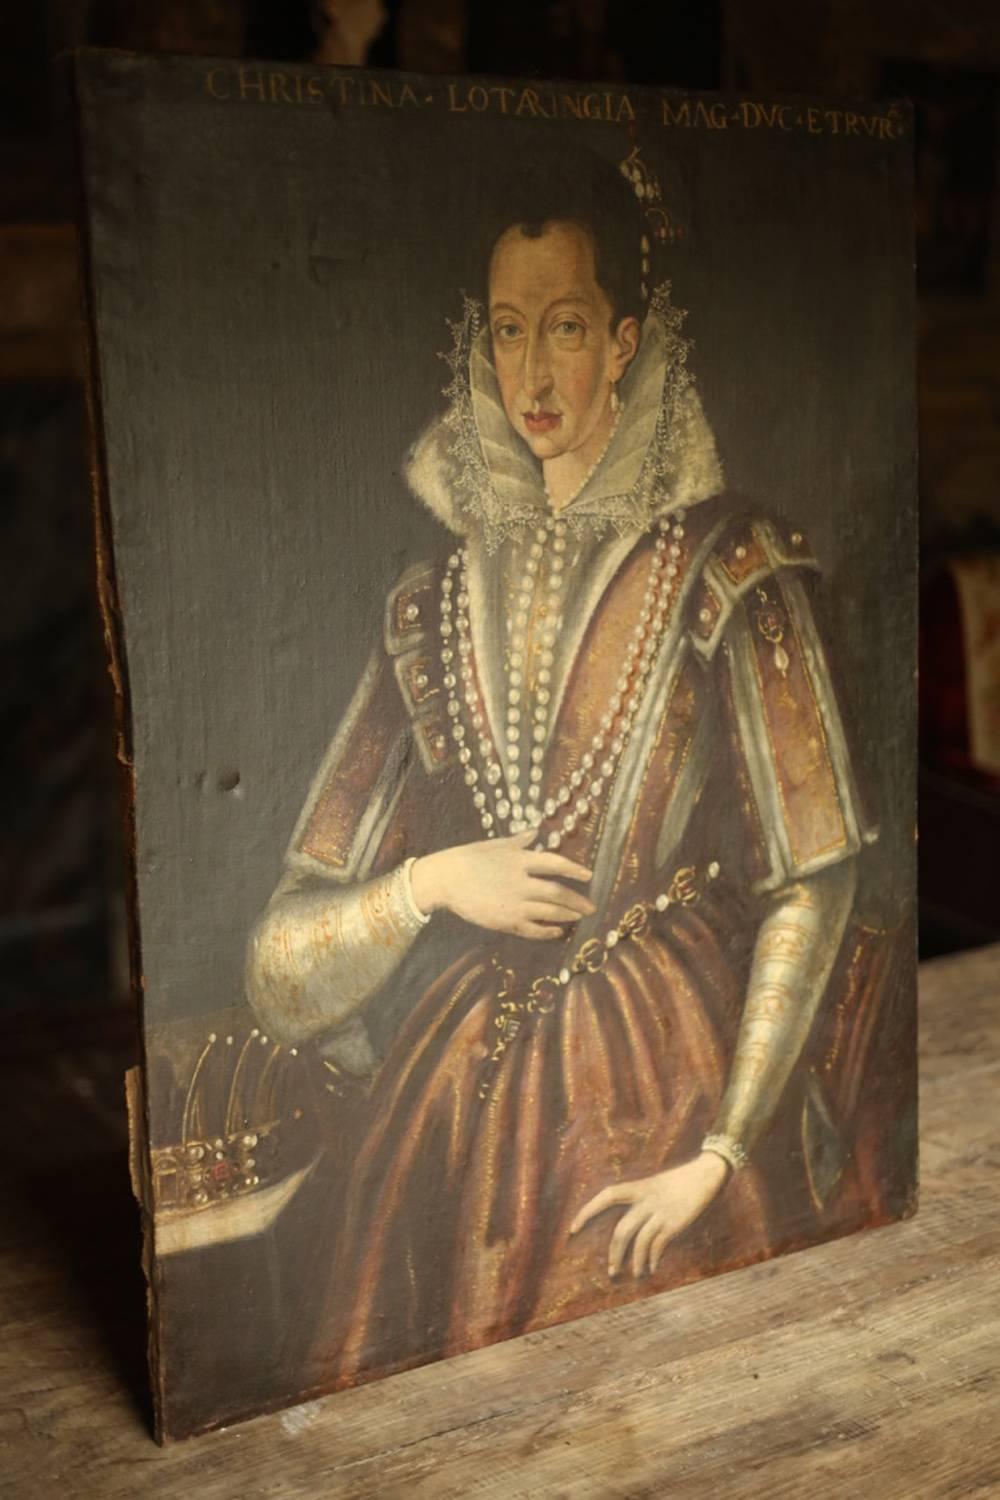 This is an exceptional 18th century oil on canvas painting of Christina of Lorraine the wife of Ferdinando 1st. This is an Italian piece and is in totally original condition. The quality of the painting is superb. It has high quality details in the